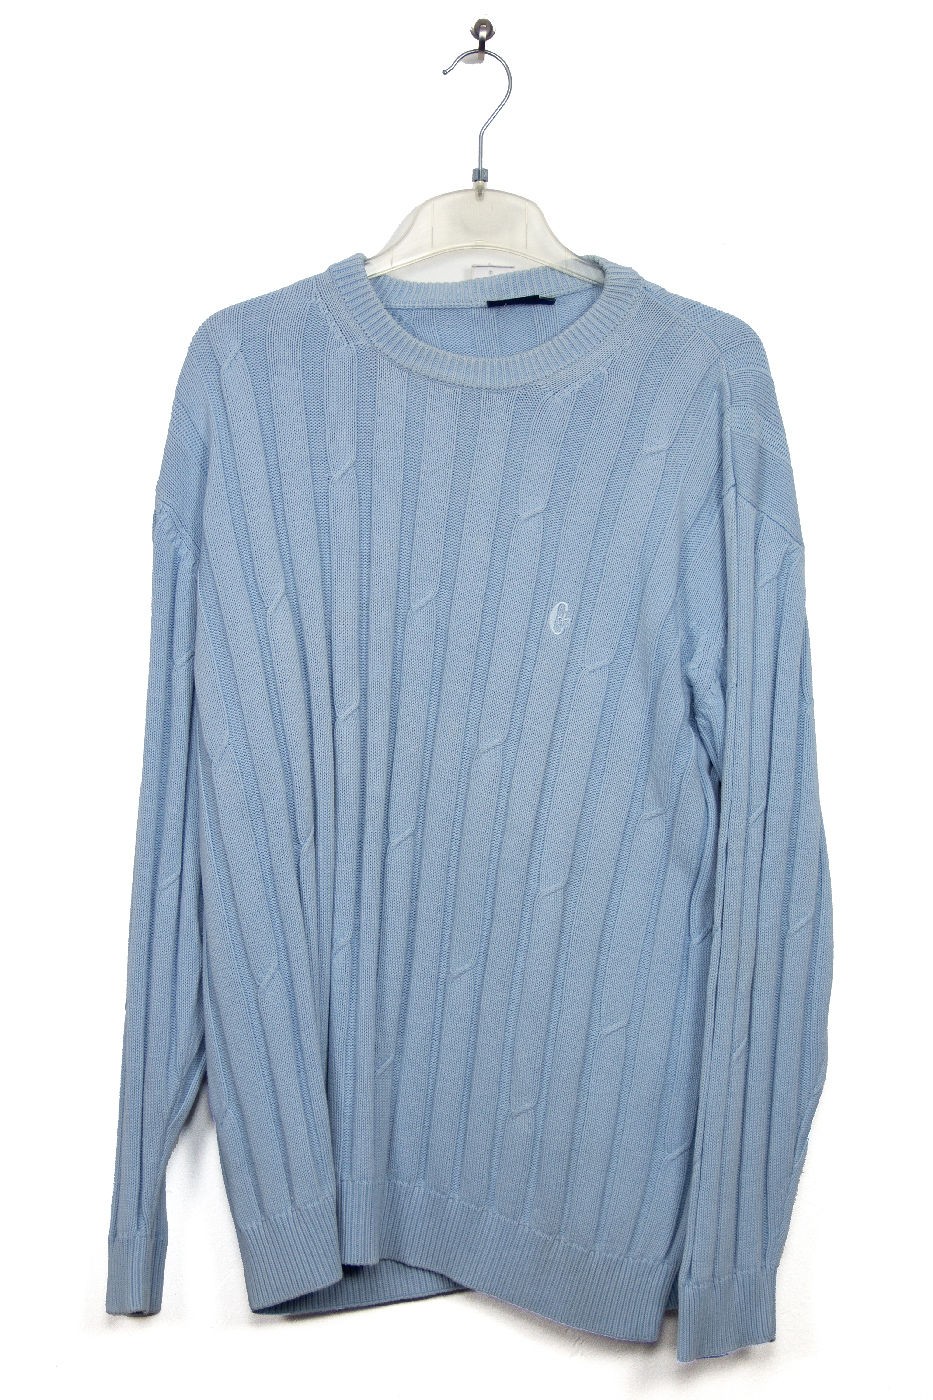 Pull Conte of Florence, taille XL 25,20 €